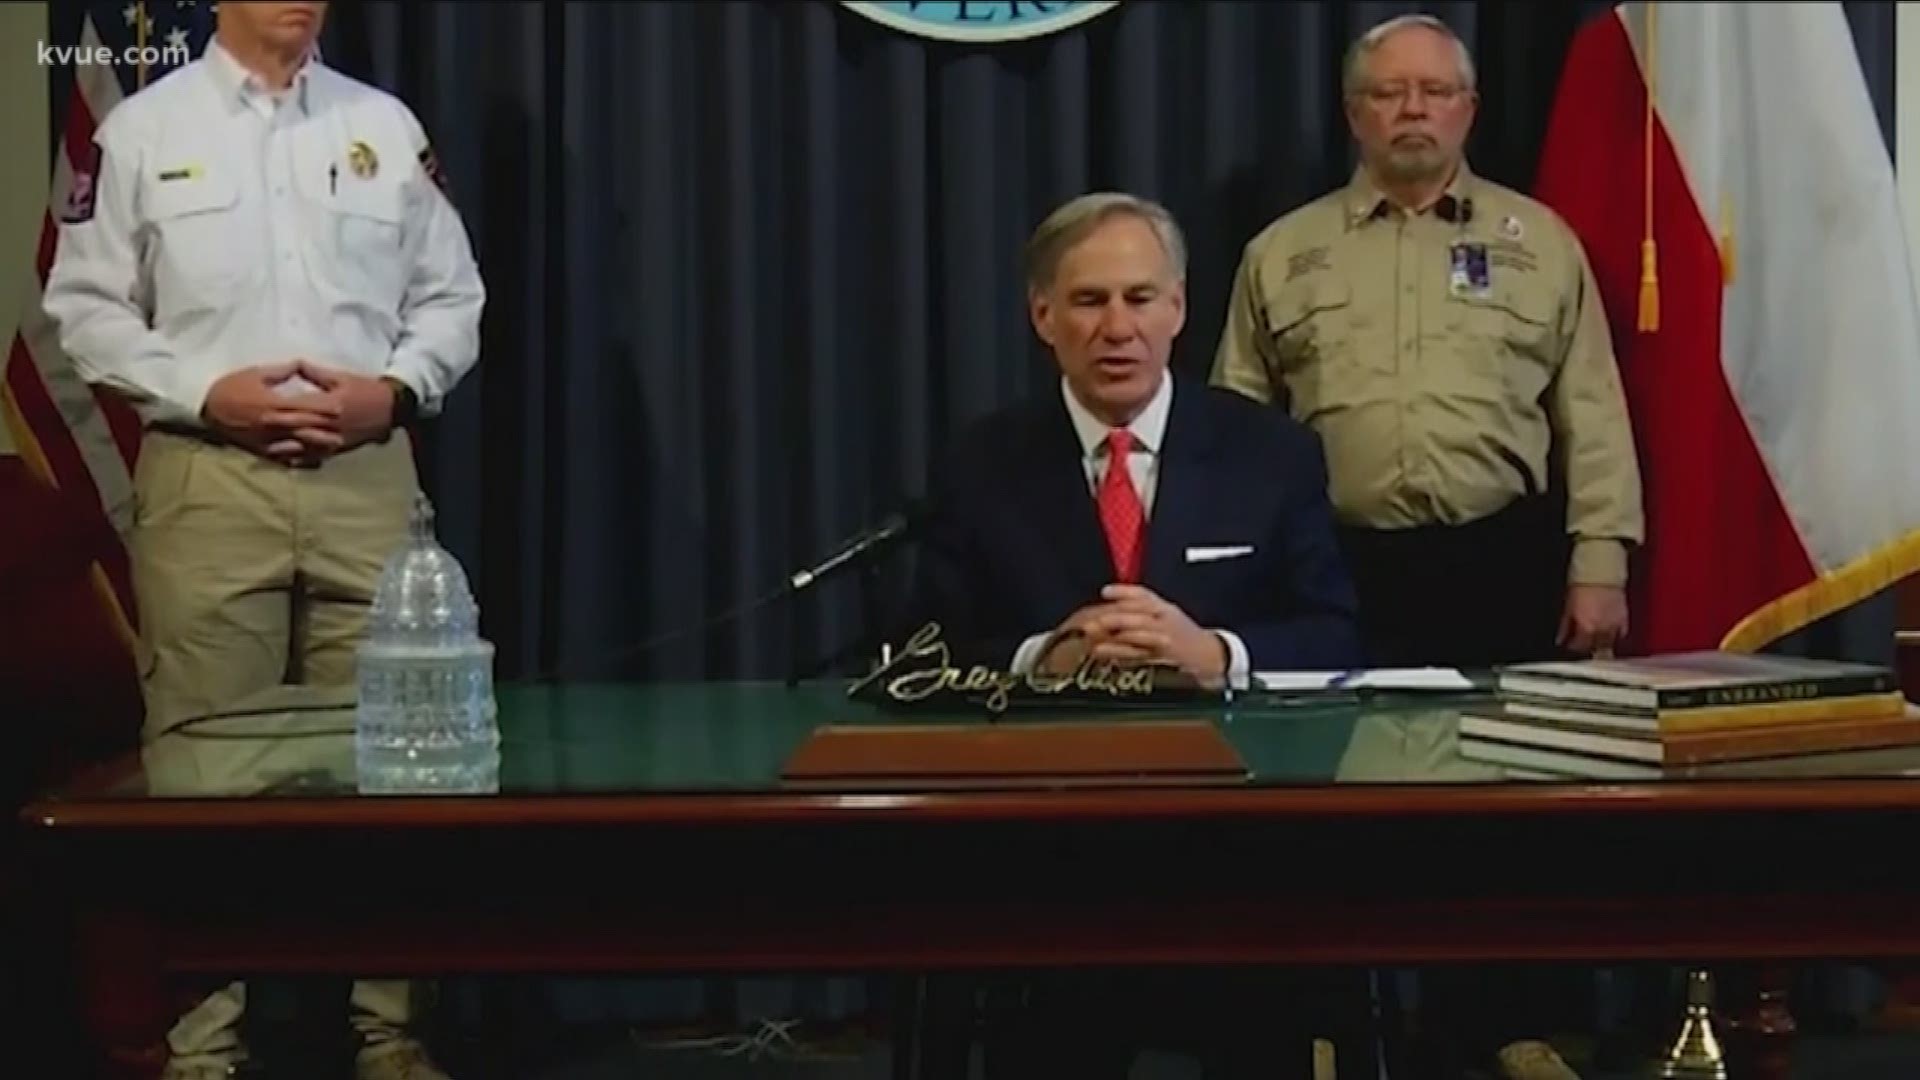 The governor will announce his plan for re-opening businesses on Friday, April 17.